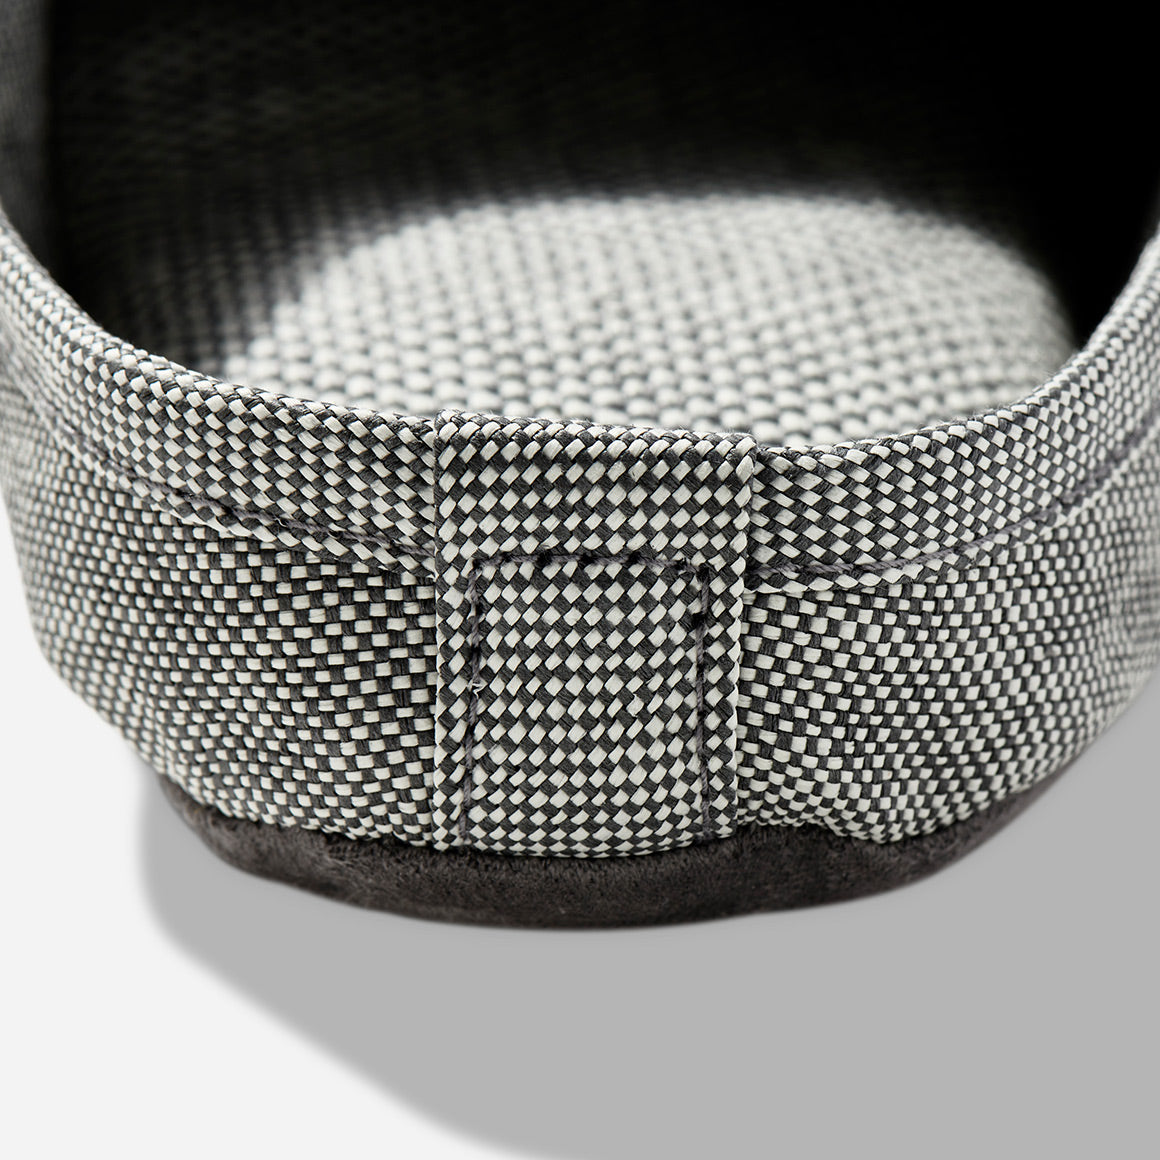 Up-close image of the heel of a light grey room slipper.